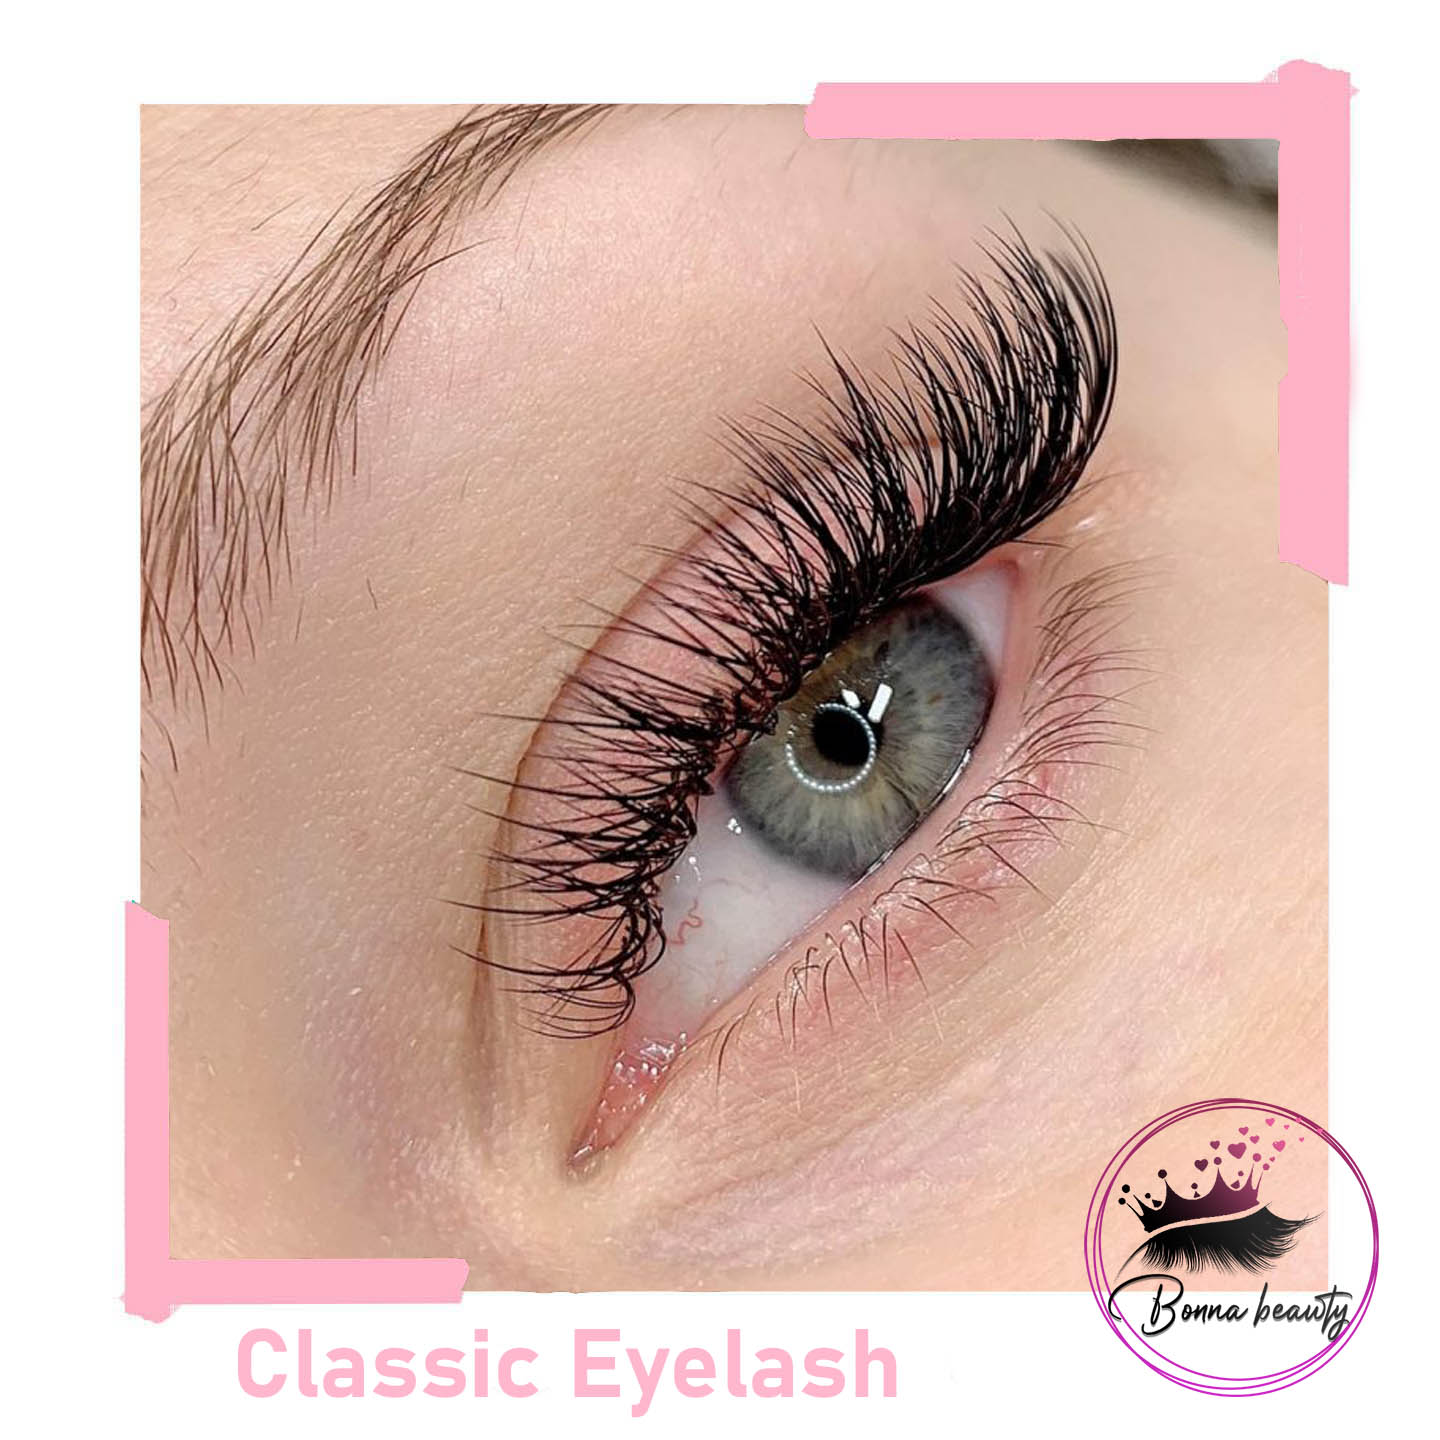 classic eyelash extension in Bankstown Sydney 5 Revesby Revesby